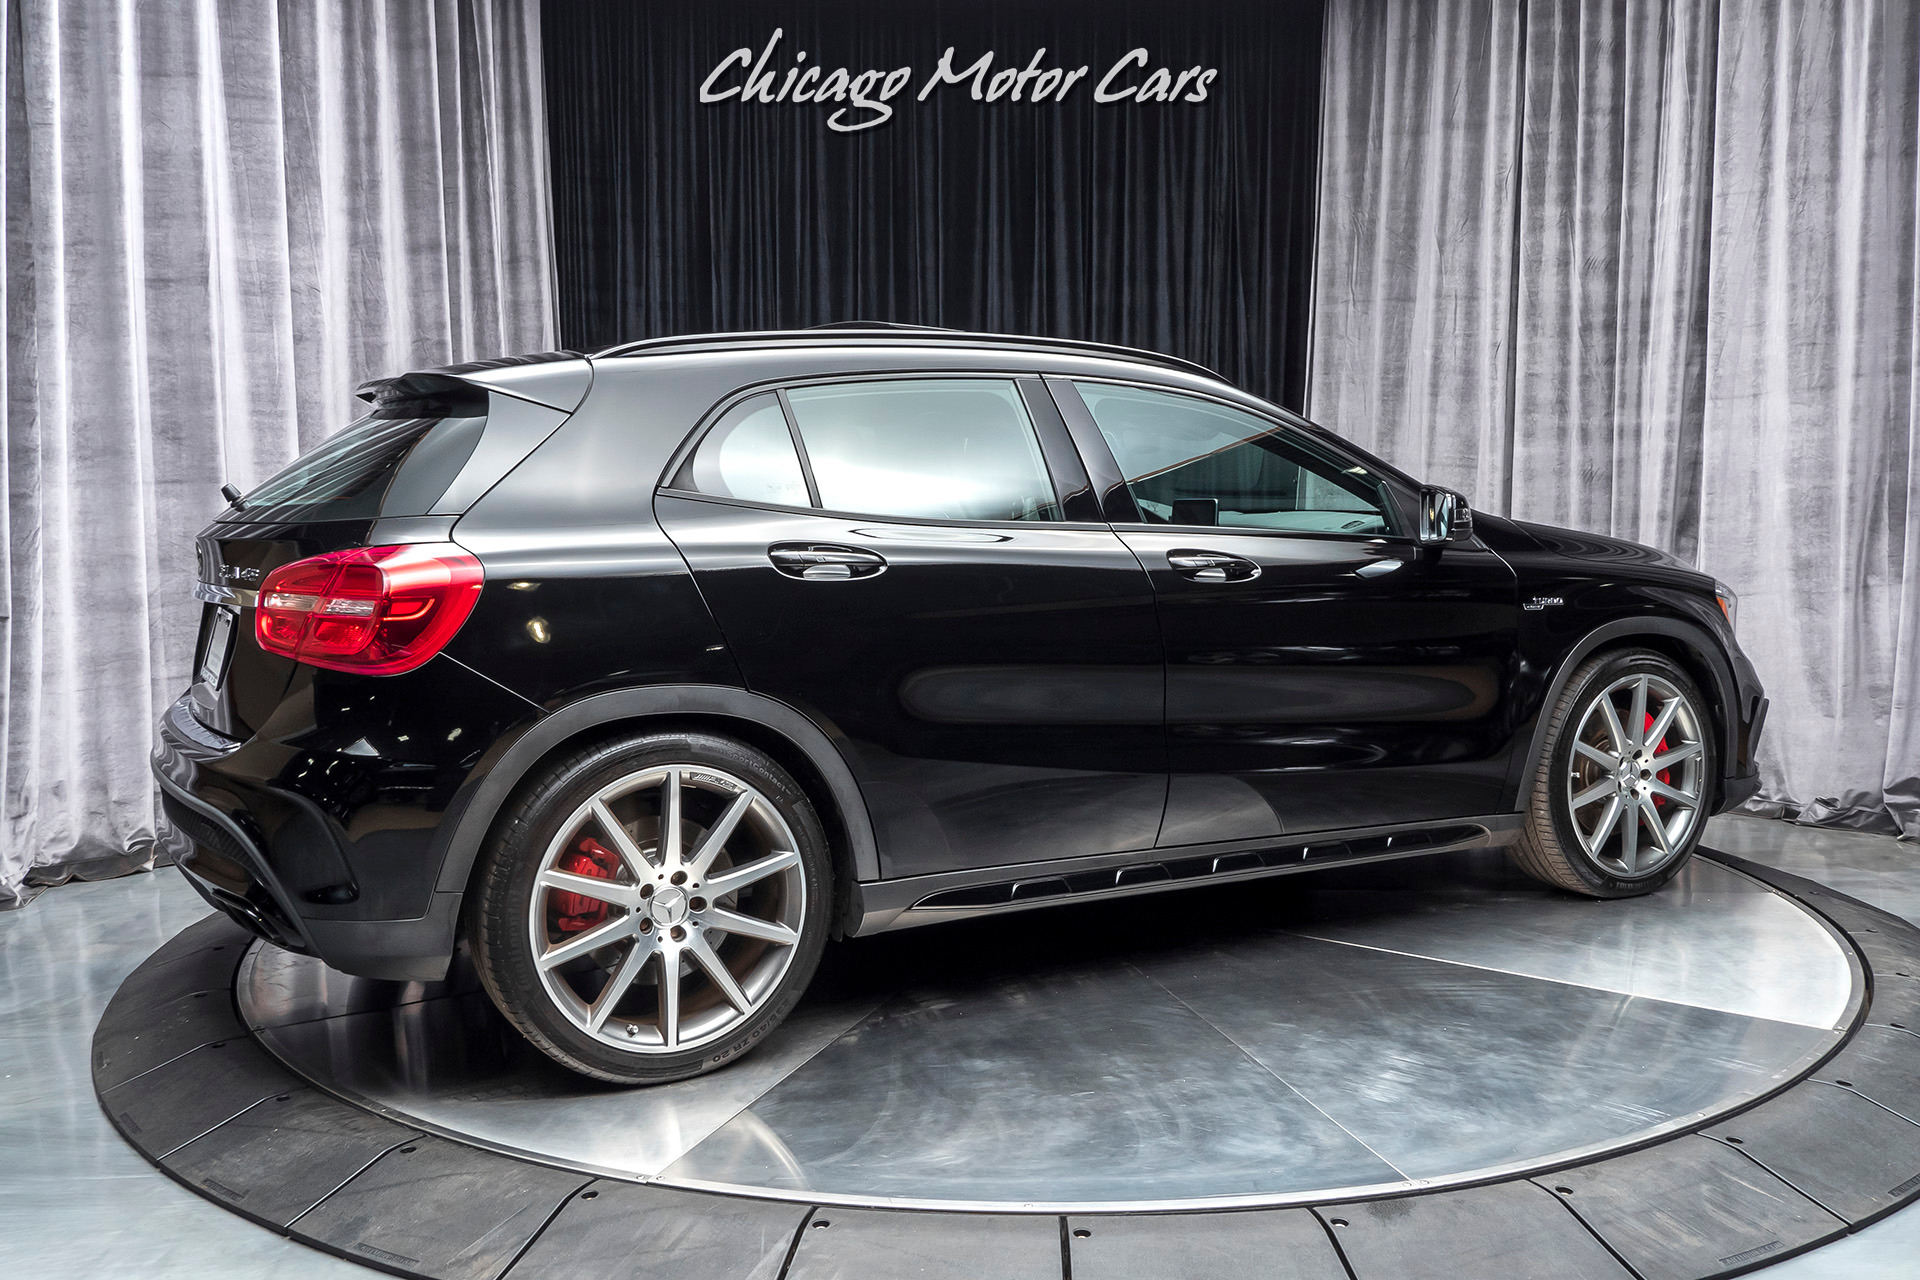 Used-2016-Mercedes-Benz-GLA45-AMG-SUV-MSRP-65K-MULTIMEDIA-PACKAGE-AMG-PERFORMANCE-SEATS